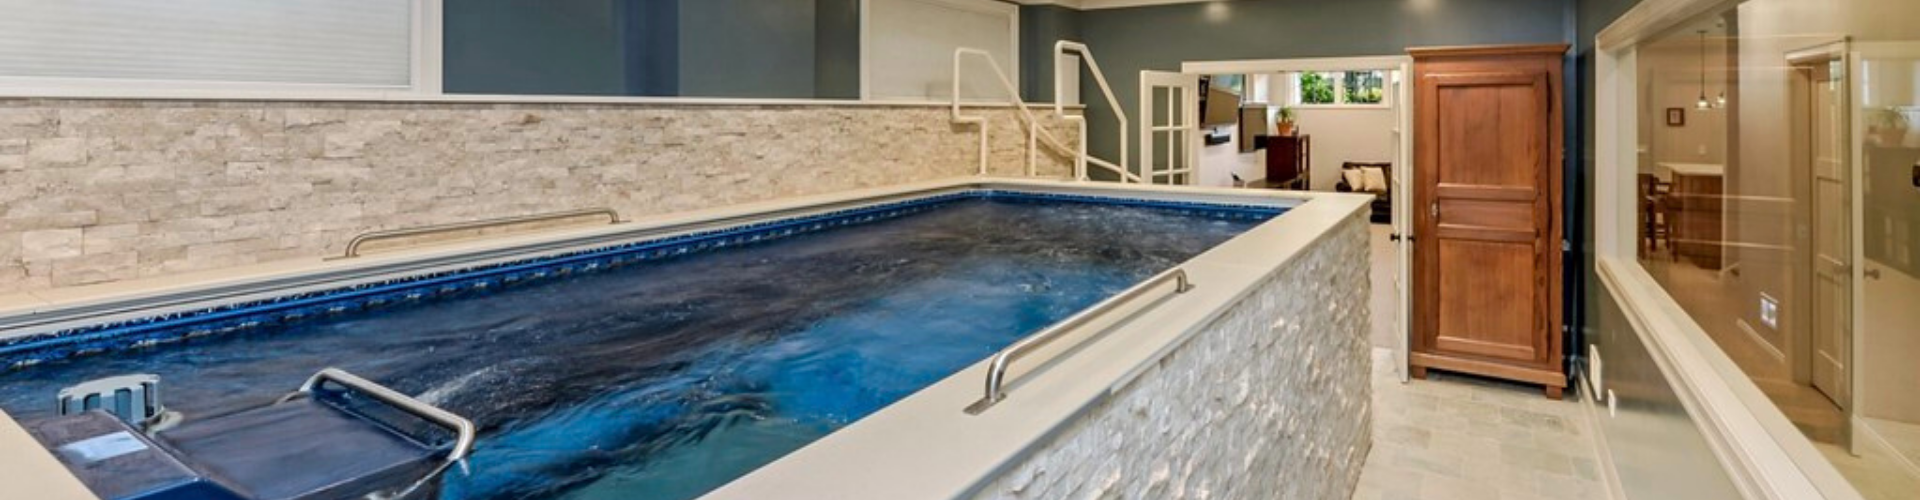 endless pool installed in a basement